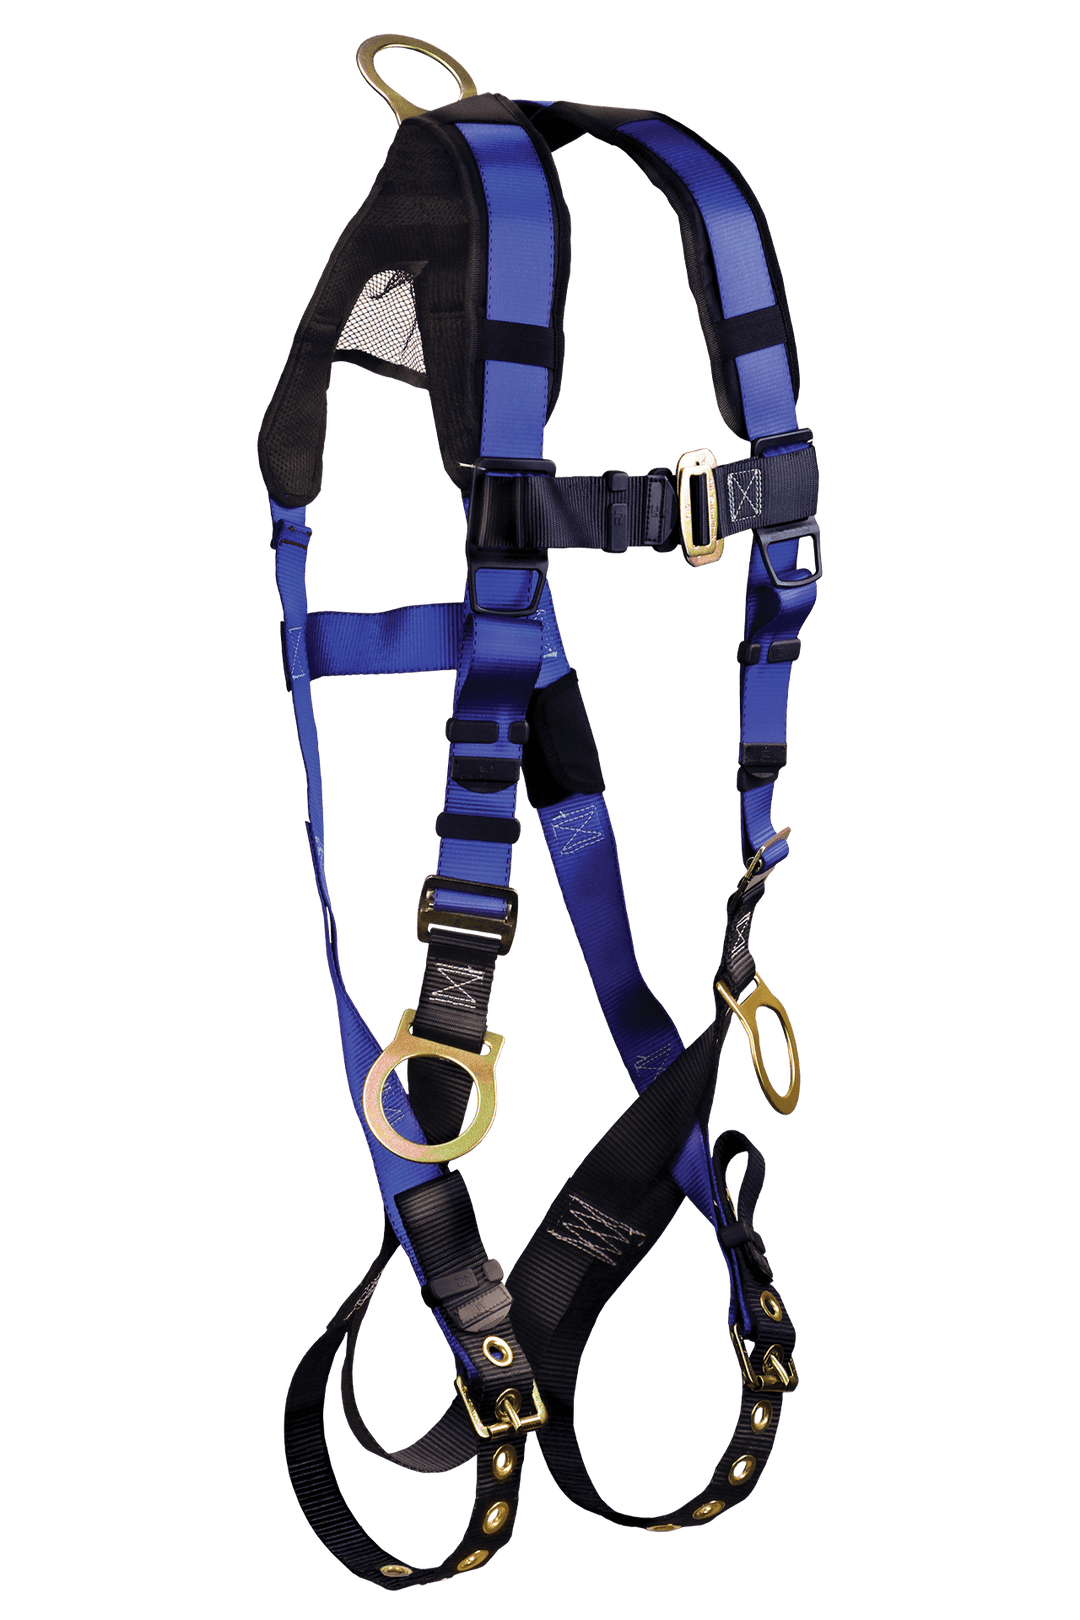 FALLTECH Contractor Plus 3D Standard Non-Belted Full Body Harness, Tongue Buckle Leg Adjustment